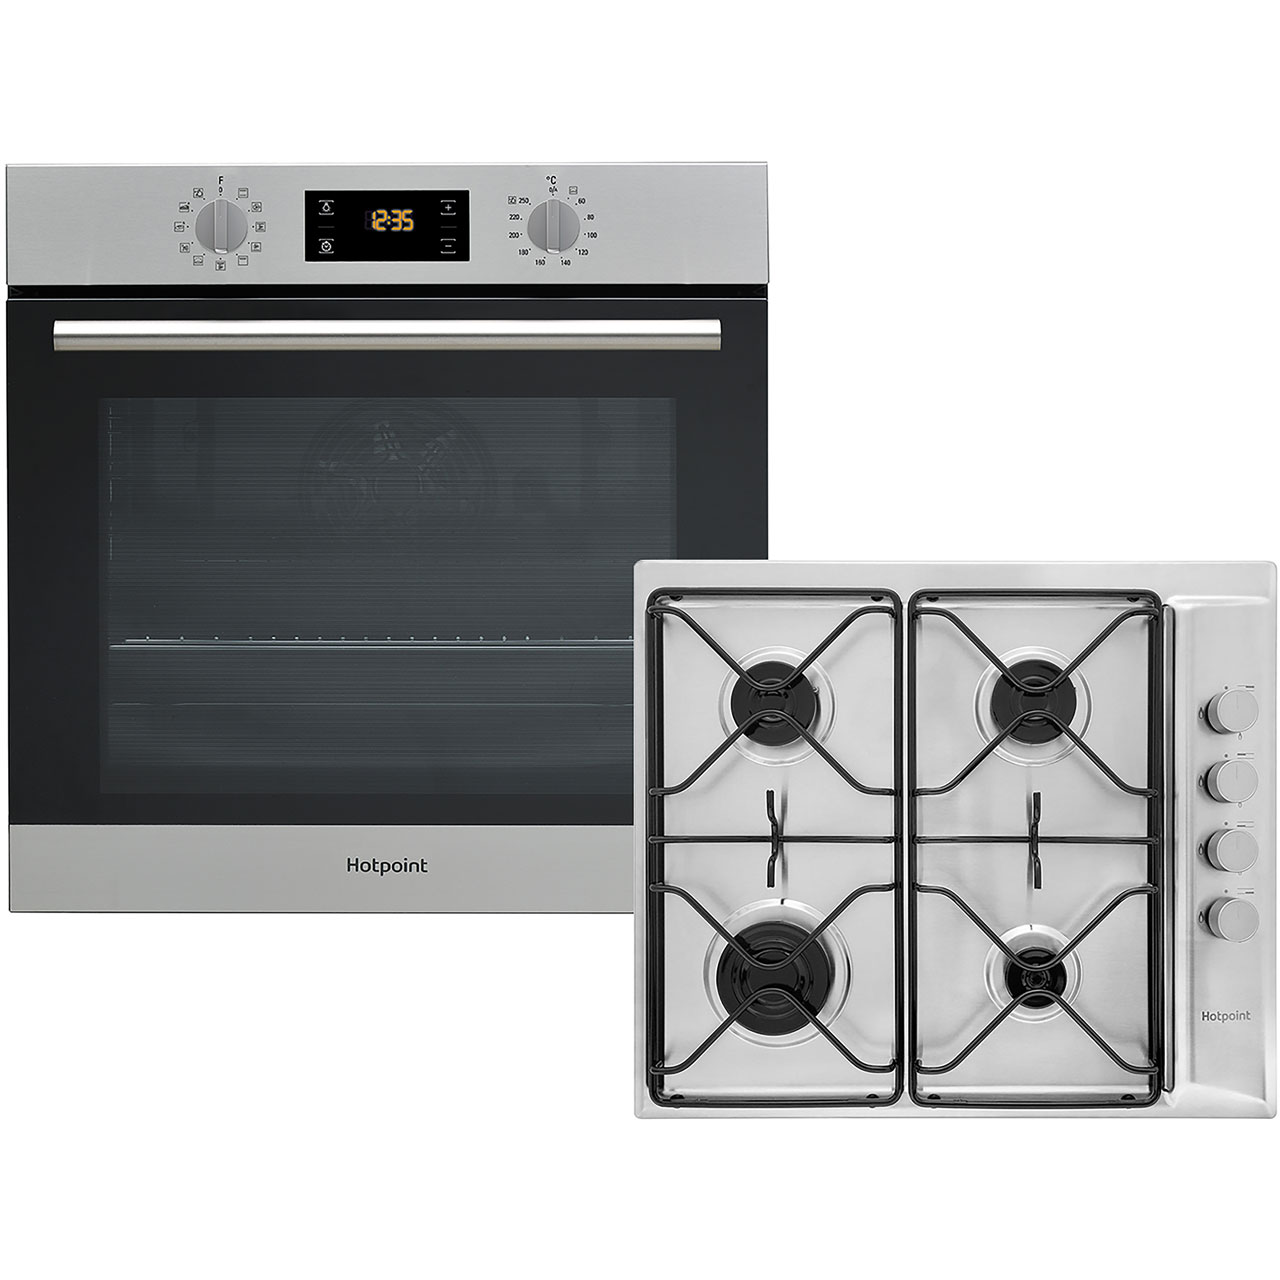 Hotpoint K002969 Built In Electric Single Oven and Gas Hob Pack Review